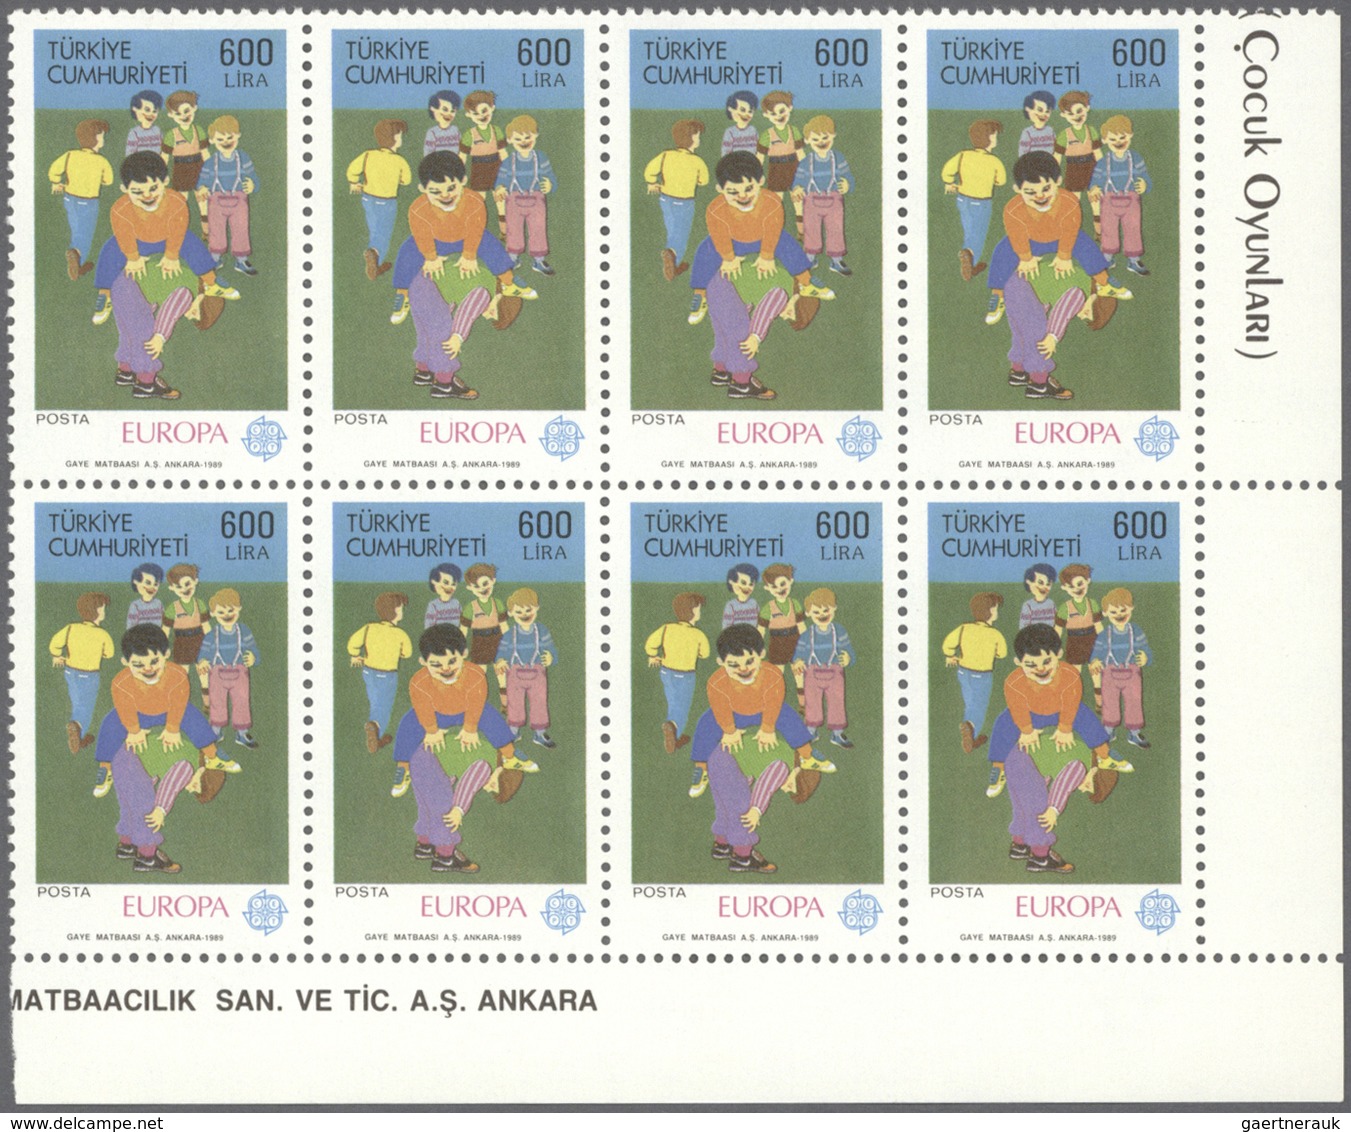 28794 Europa-Union (CEPT): CEPT 1989 complete sets without the blocks, MHN per 100. Michel 16310,- ?. ÷ 19